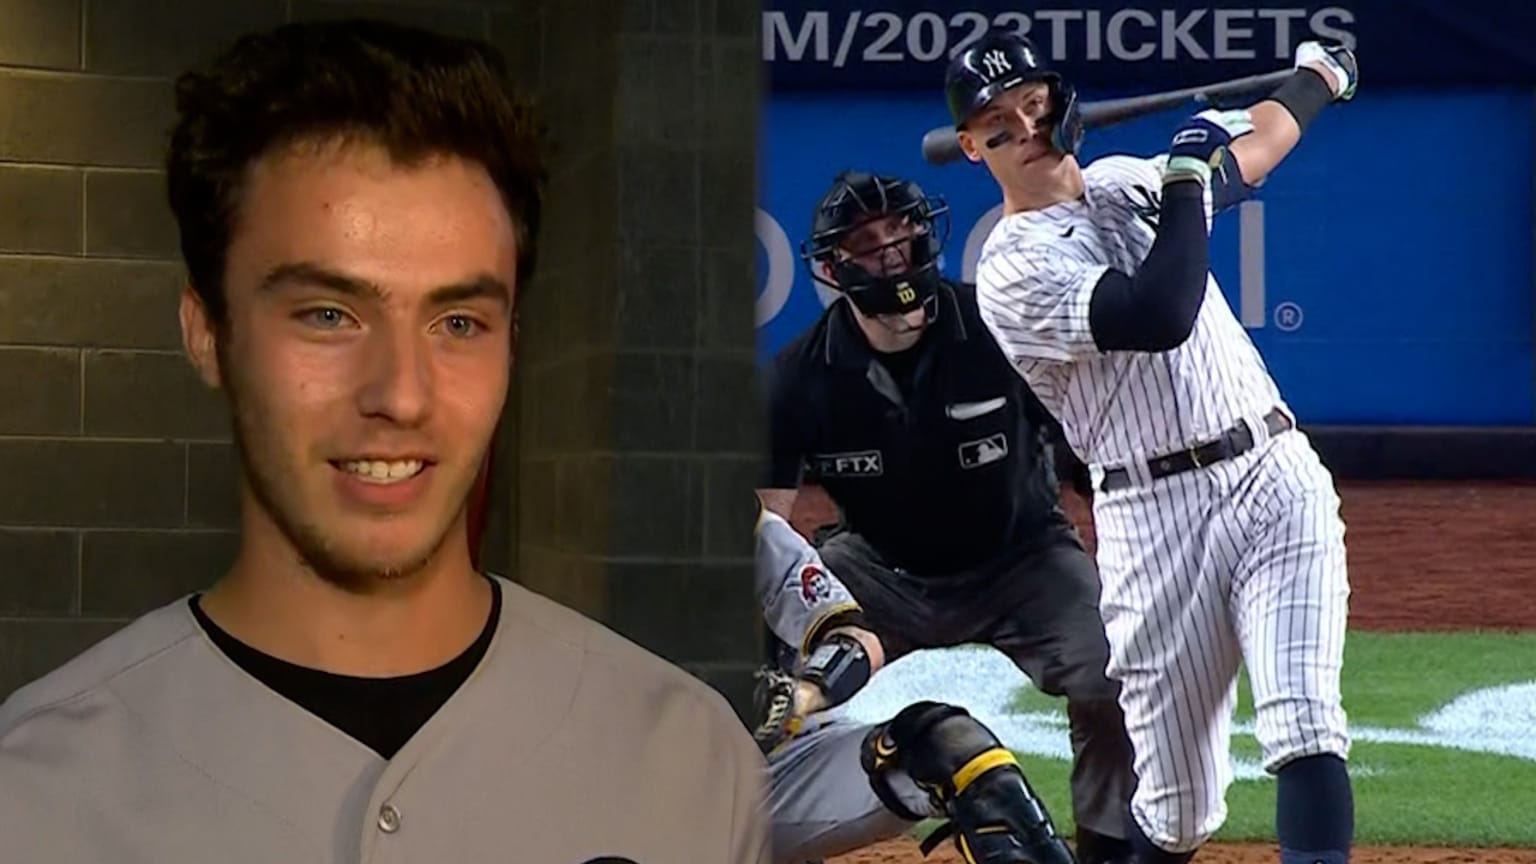 A split-screen image showing a college-aged fan being interviewed next to Aaron Judge following through on his swing